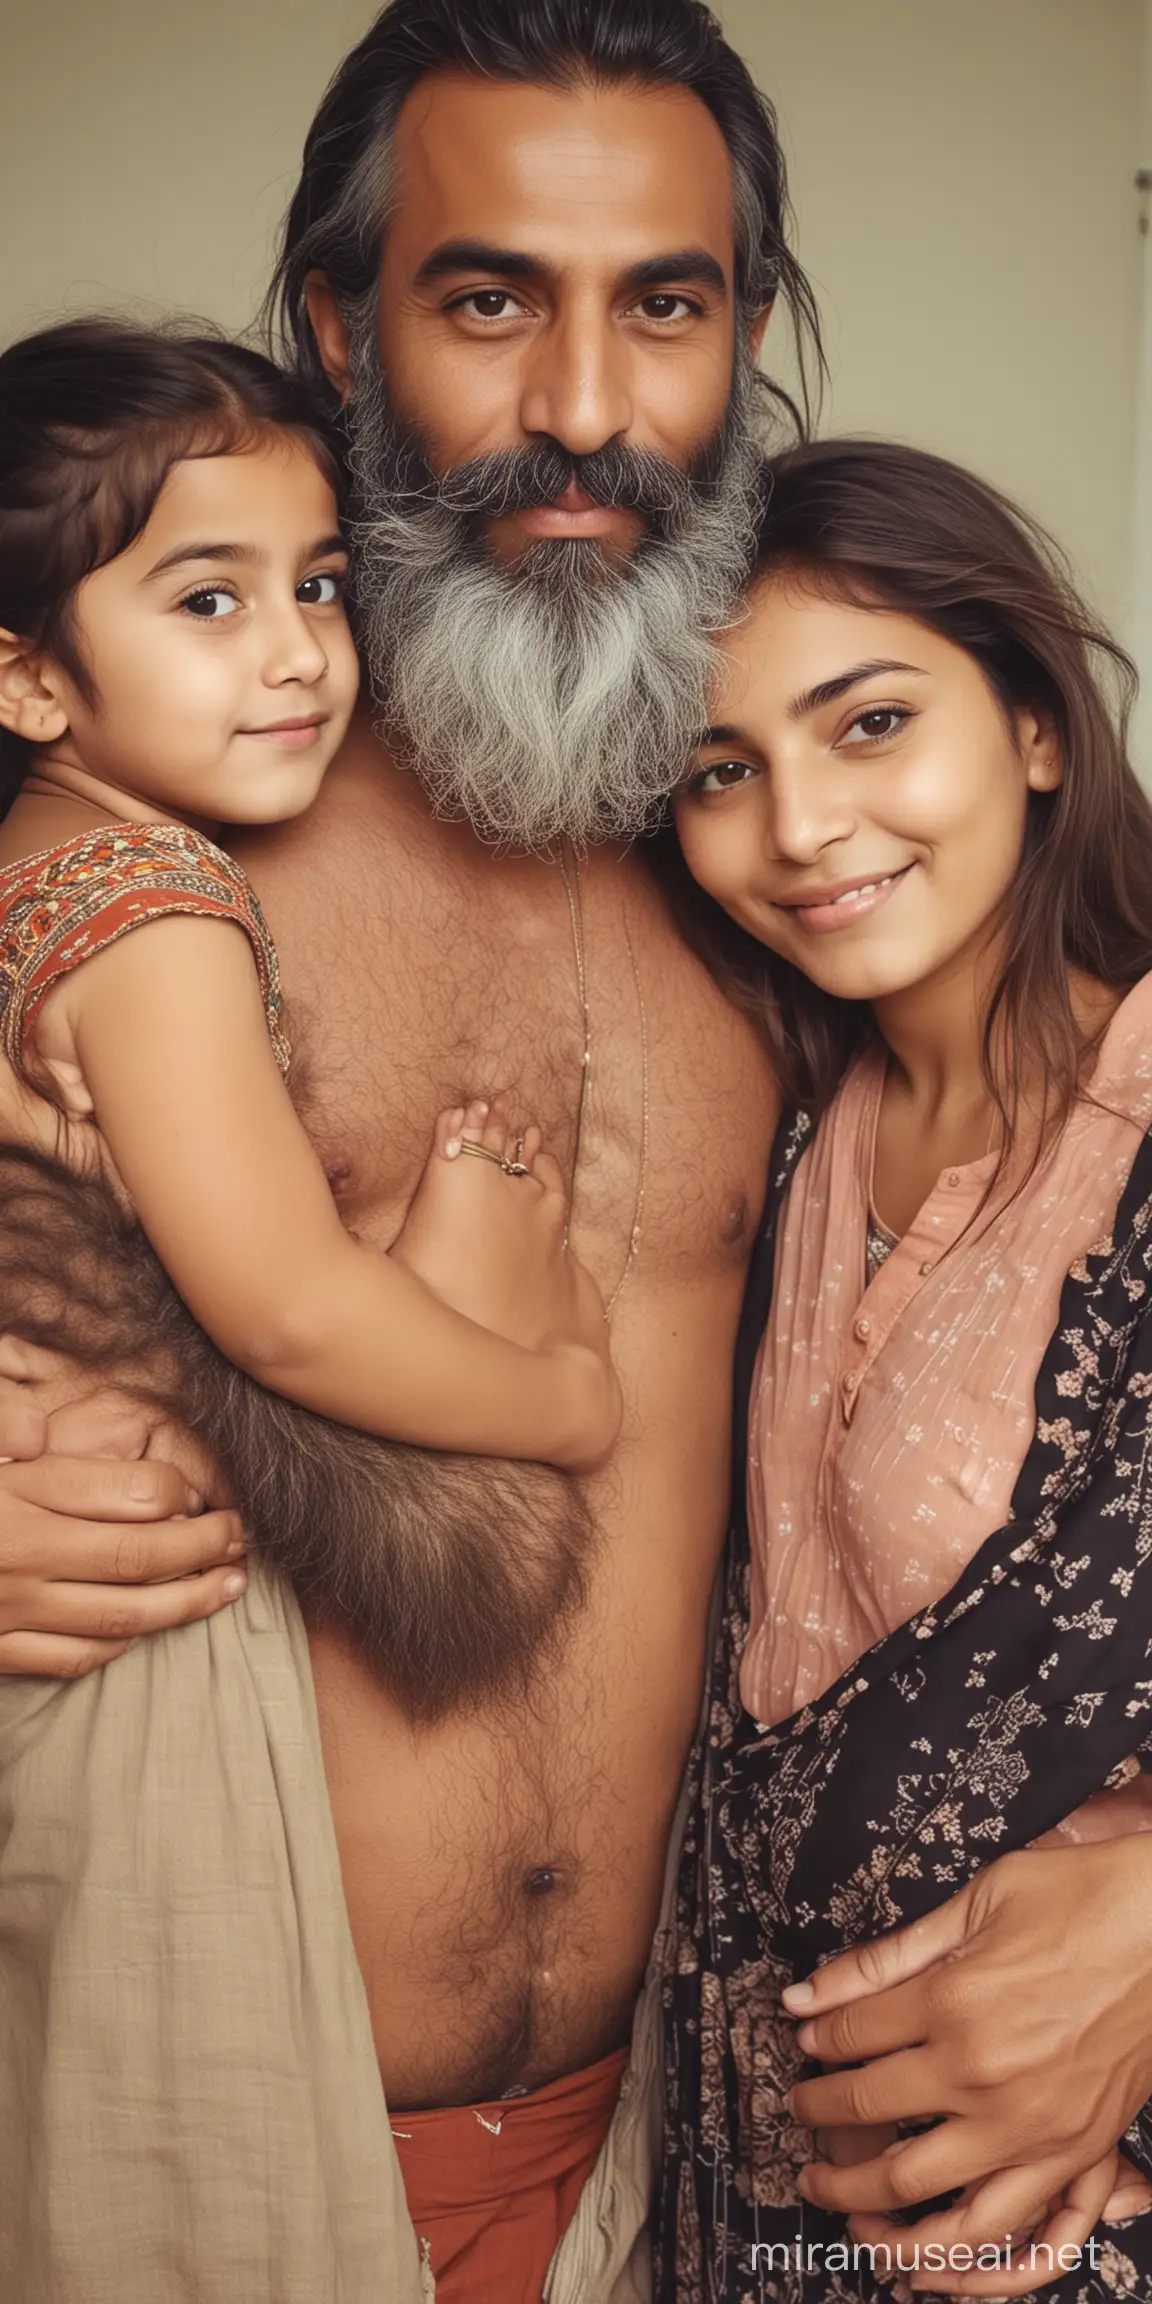 Create a image of polyamorous couple of one older grandfather and one young boy and one young girl, Mature muscular Pakistani man, hot, handsome, beautiful, sexy, full beard, partially grey, shirtless, hairy body, hairy, chest, wearing kameez  kissing young boyfriend and young girlfriend, hot, handsome, sexy, beautiful,